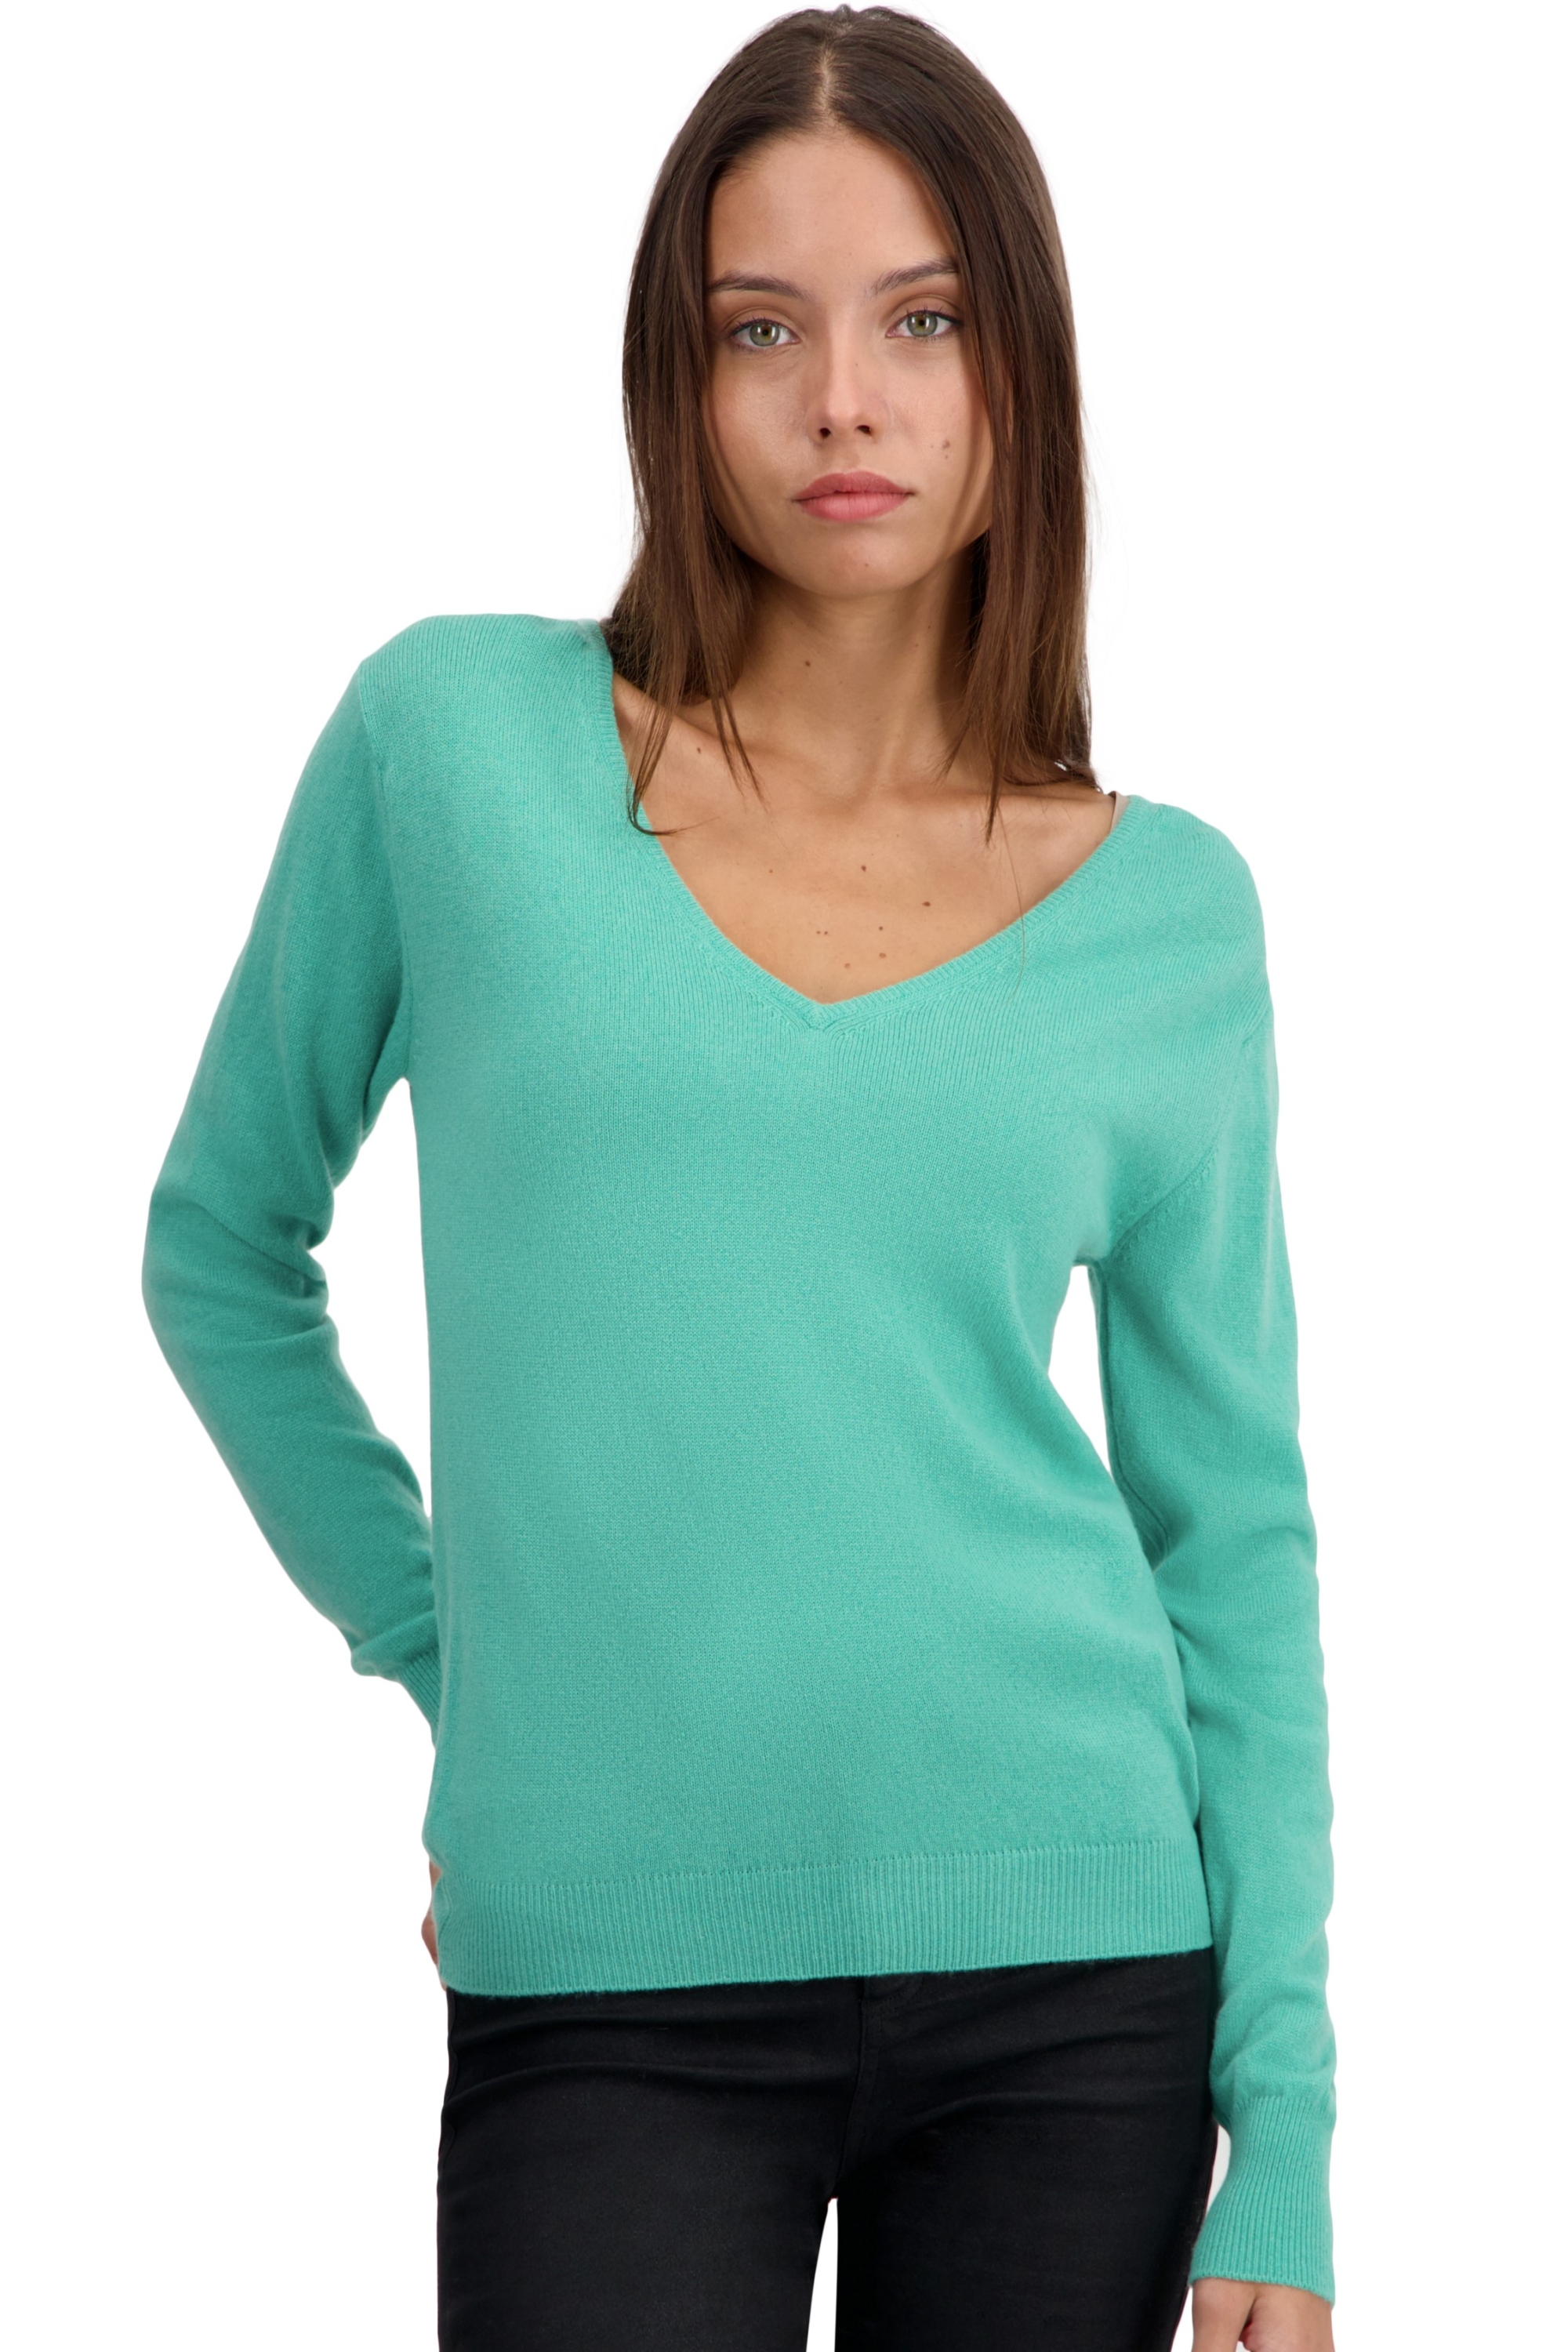 Cashmere ladies basic sweaters at low prices trieste first nile xs